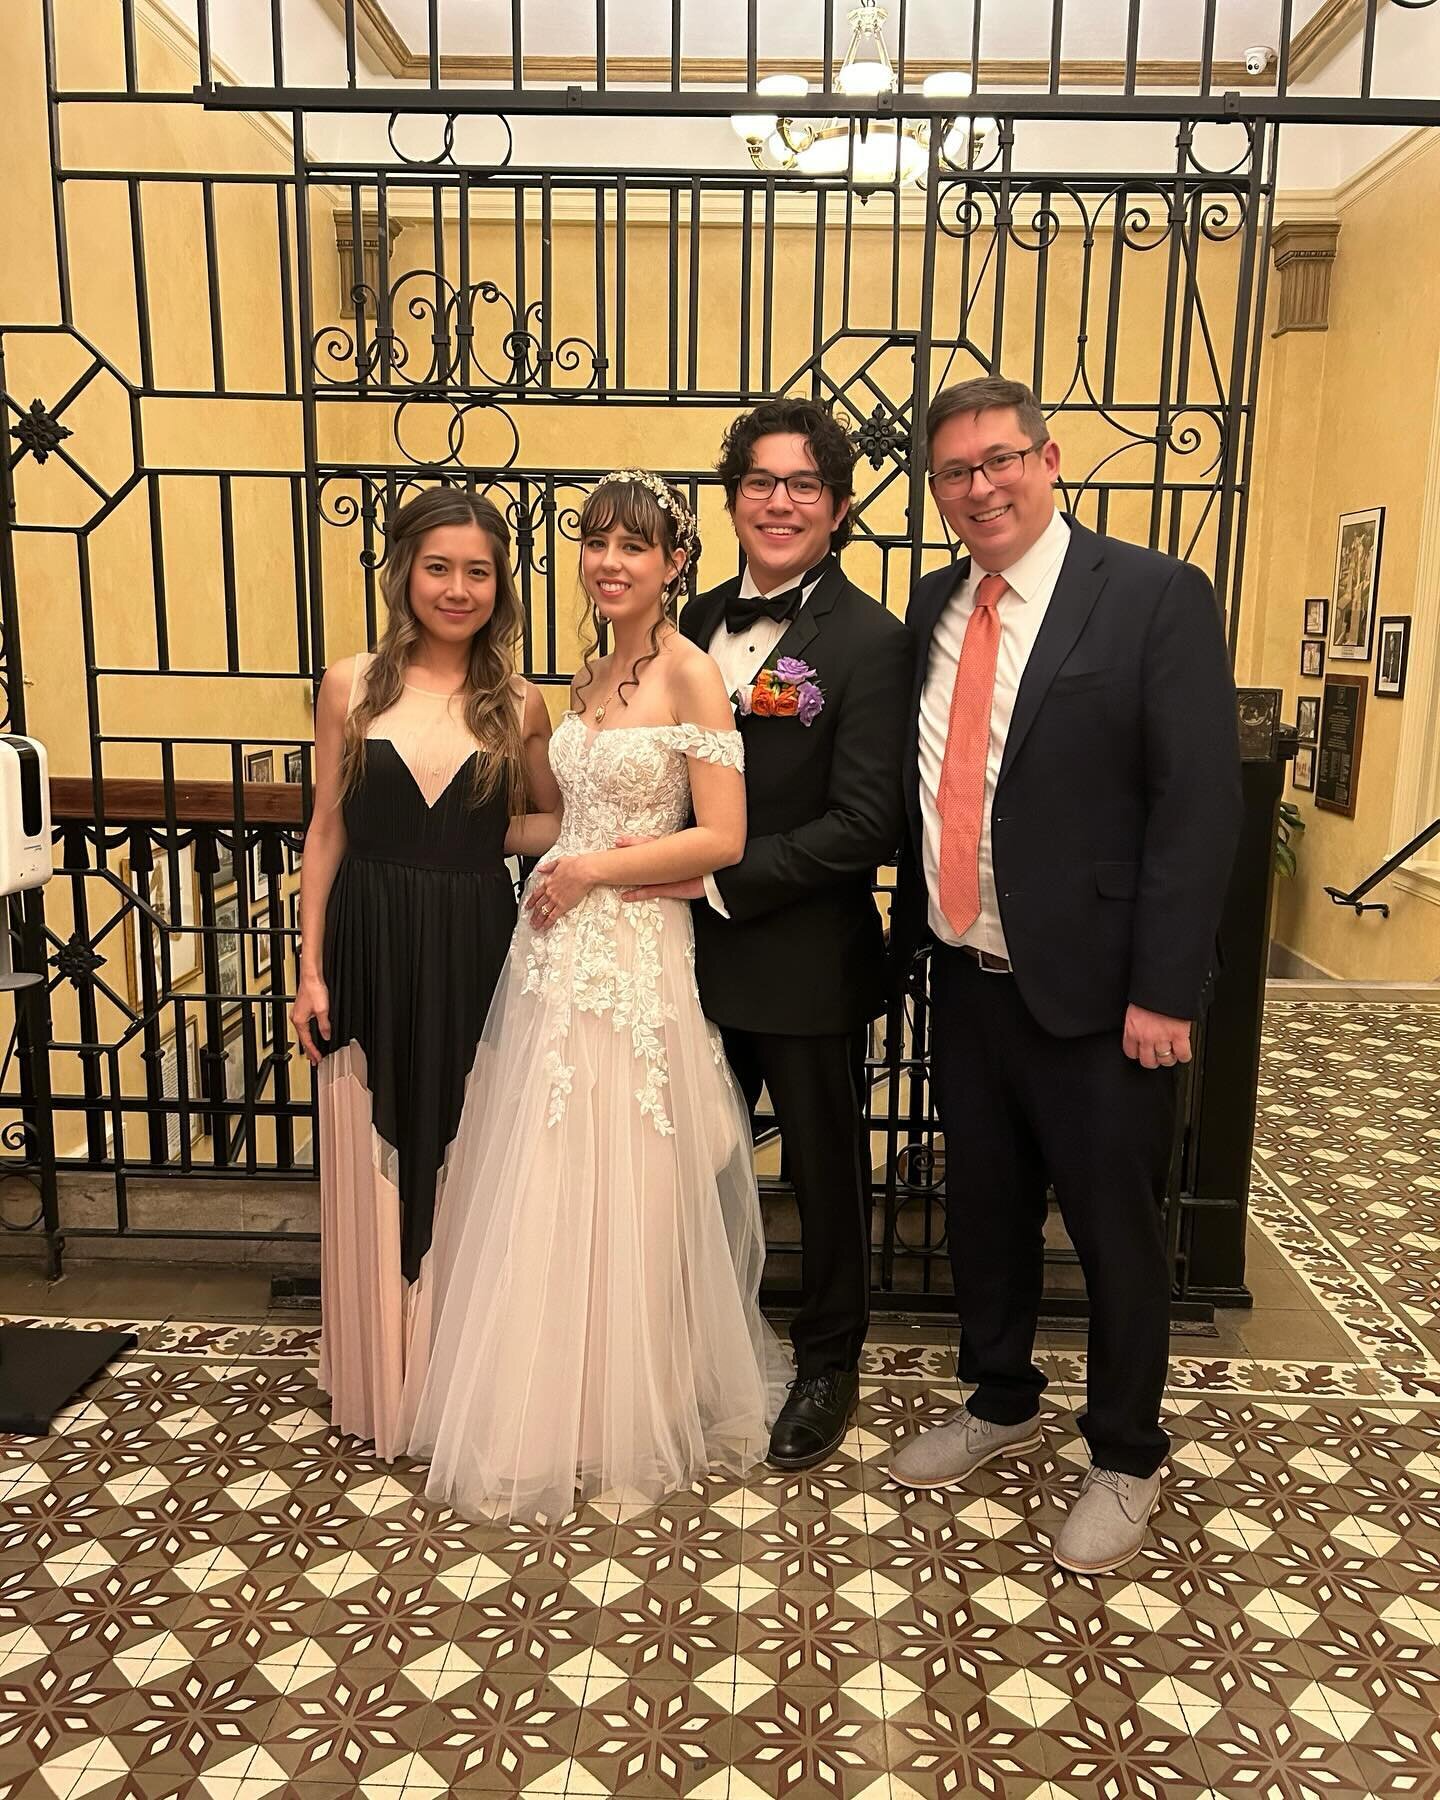 Wishing our students Marcus &amp; Isabella the happiest &amp; musical life ahead together!! And My former student Jennifer is starting med school this fall! Congratulations everyone 💕🎶💕🎶 @uf_som